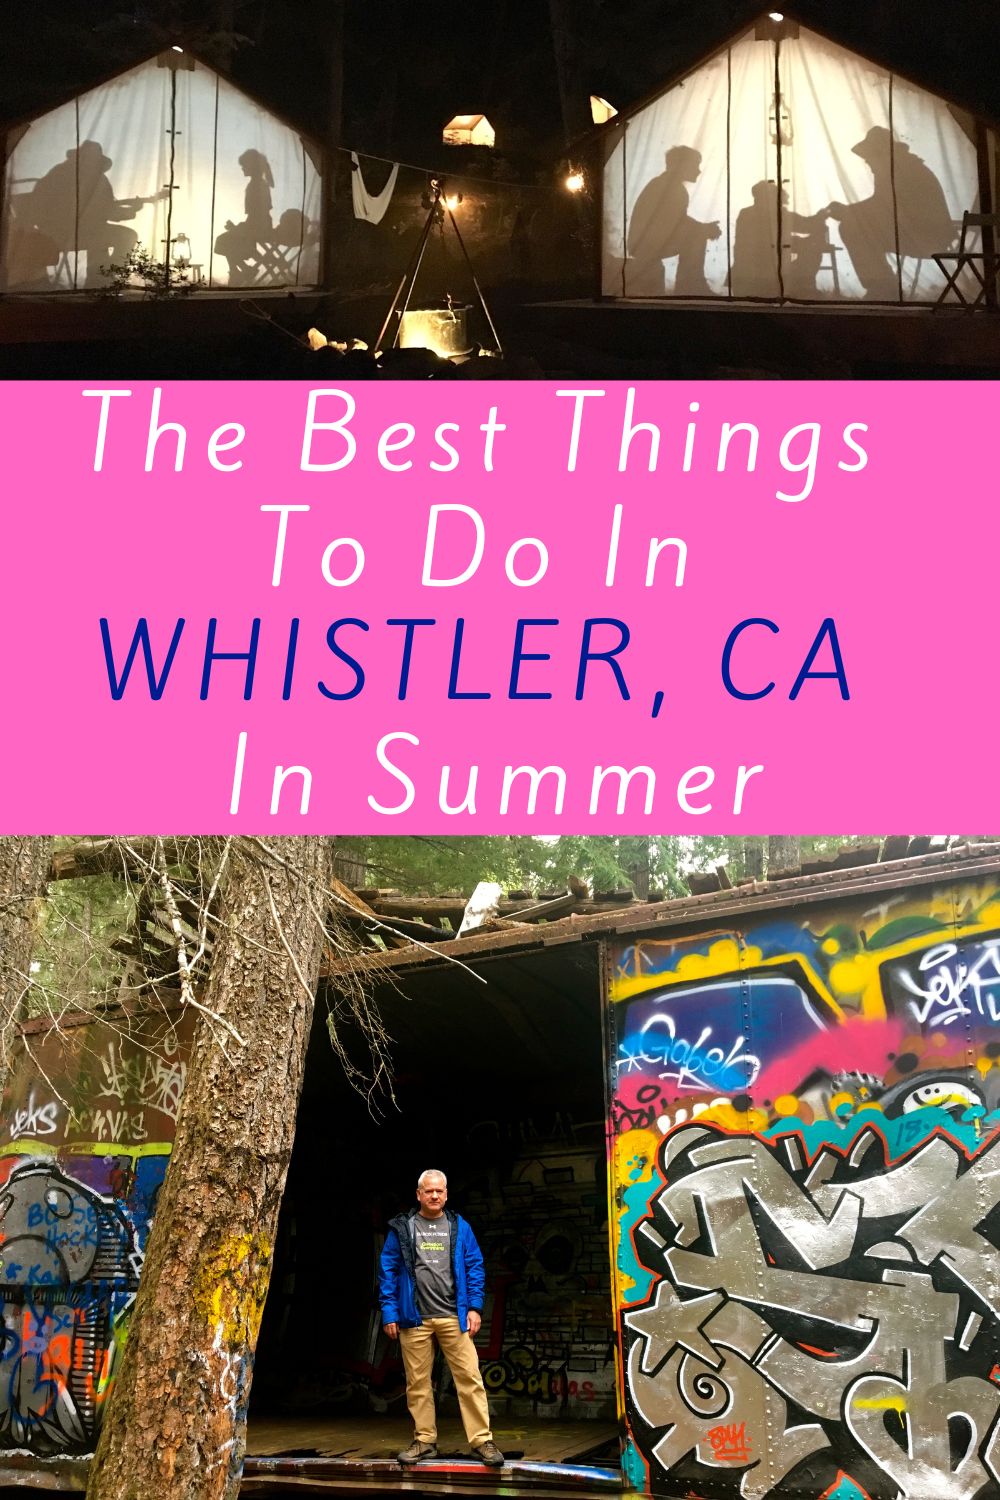 here are the best things to do with kids in whistler, b.c. in summer, outdoors and inside. plus, restaurants and hotels to look for.